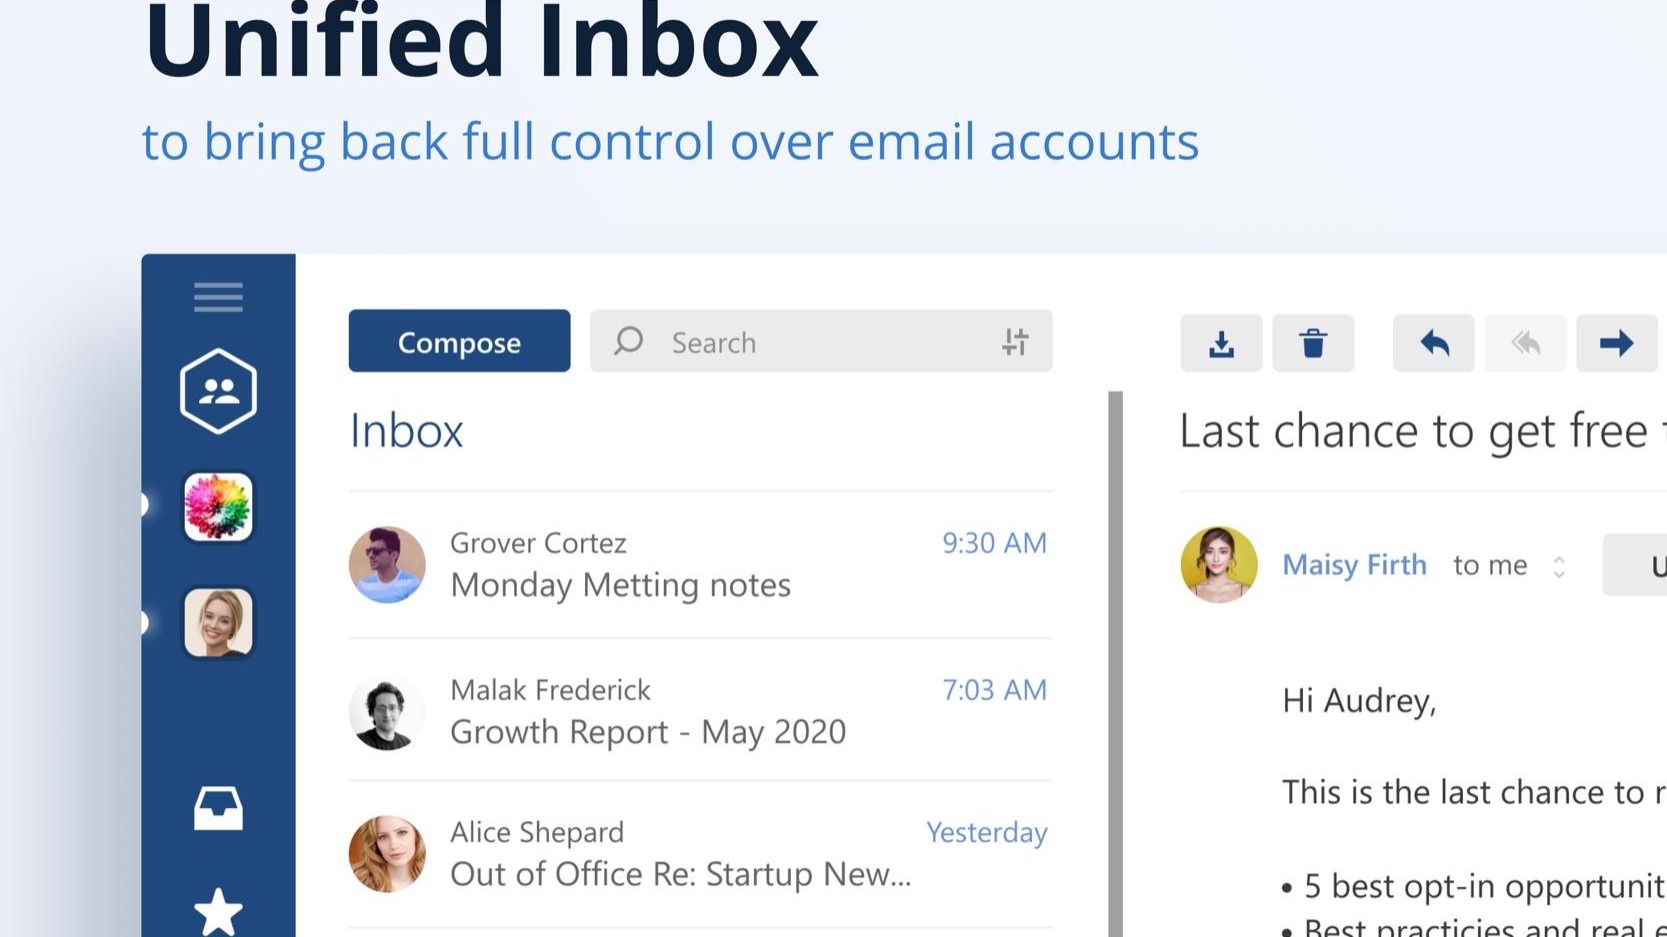 on mailbird can you send one email every 10 seconds